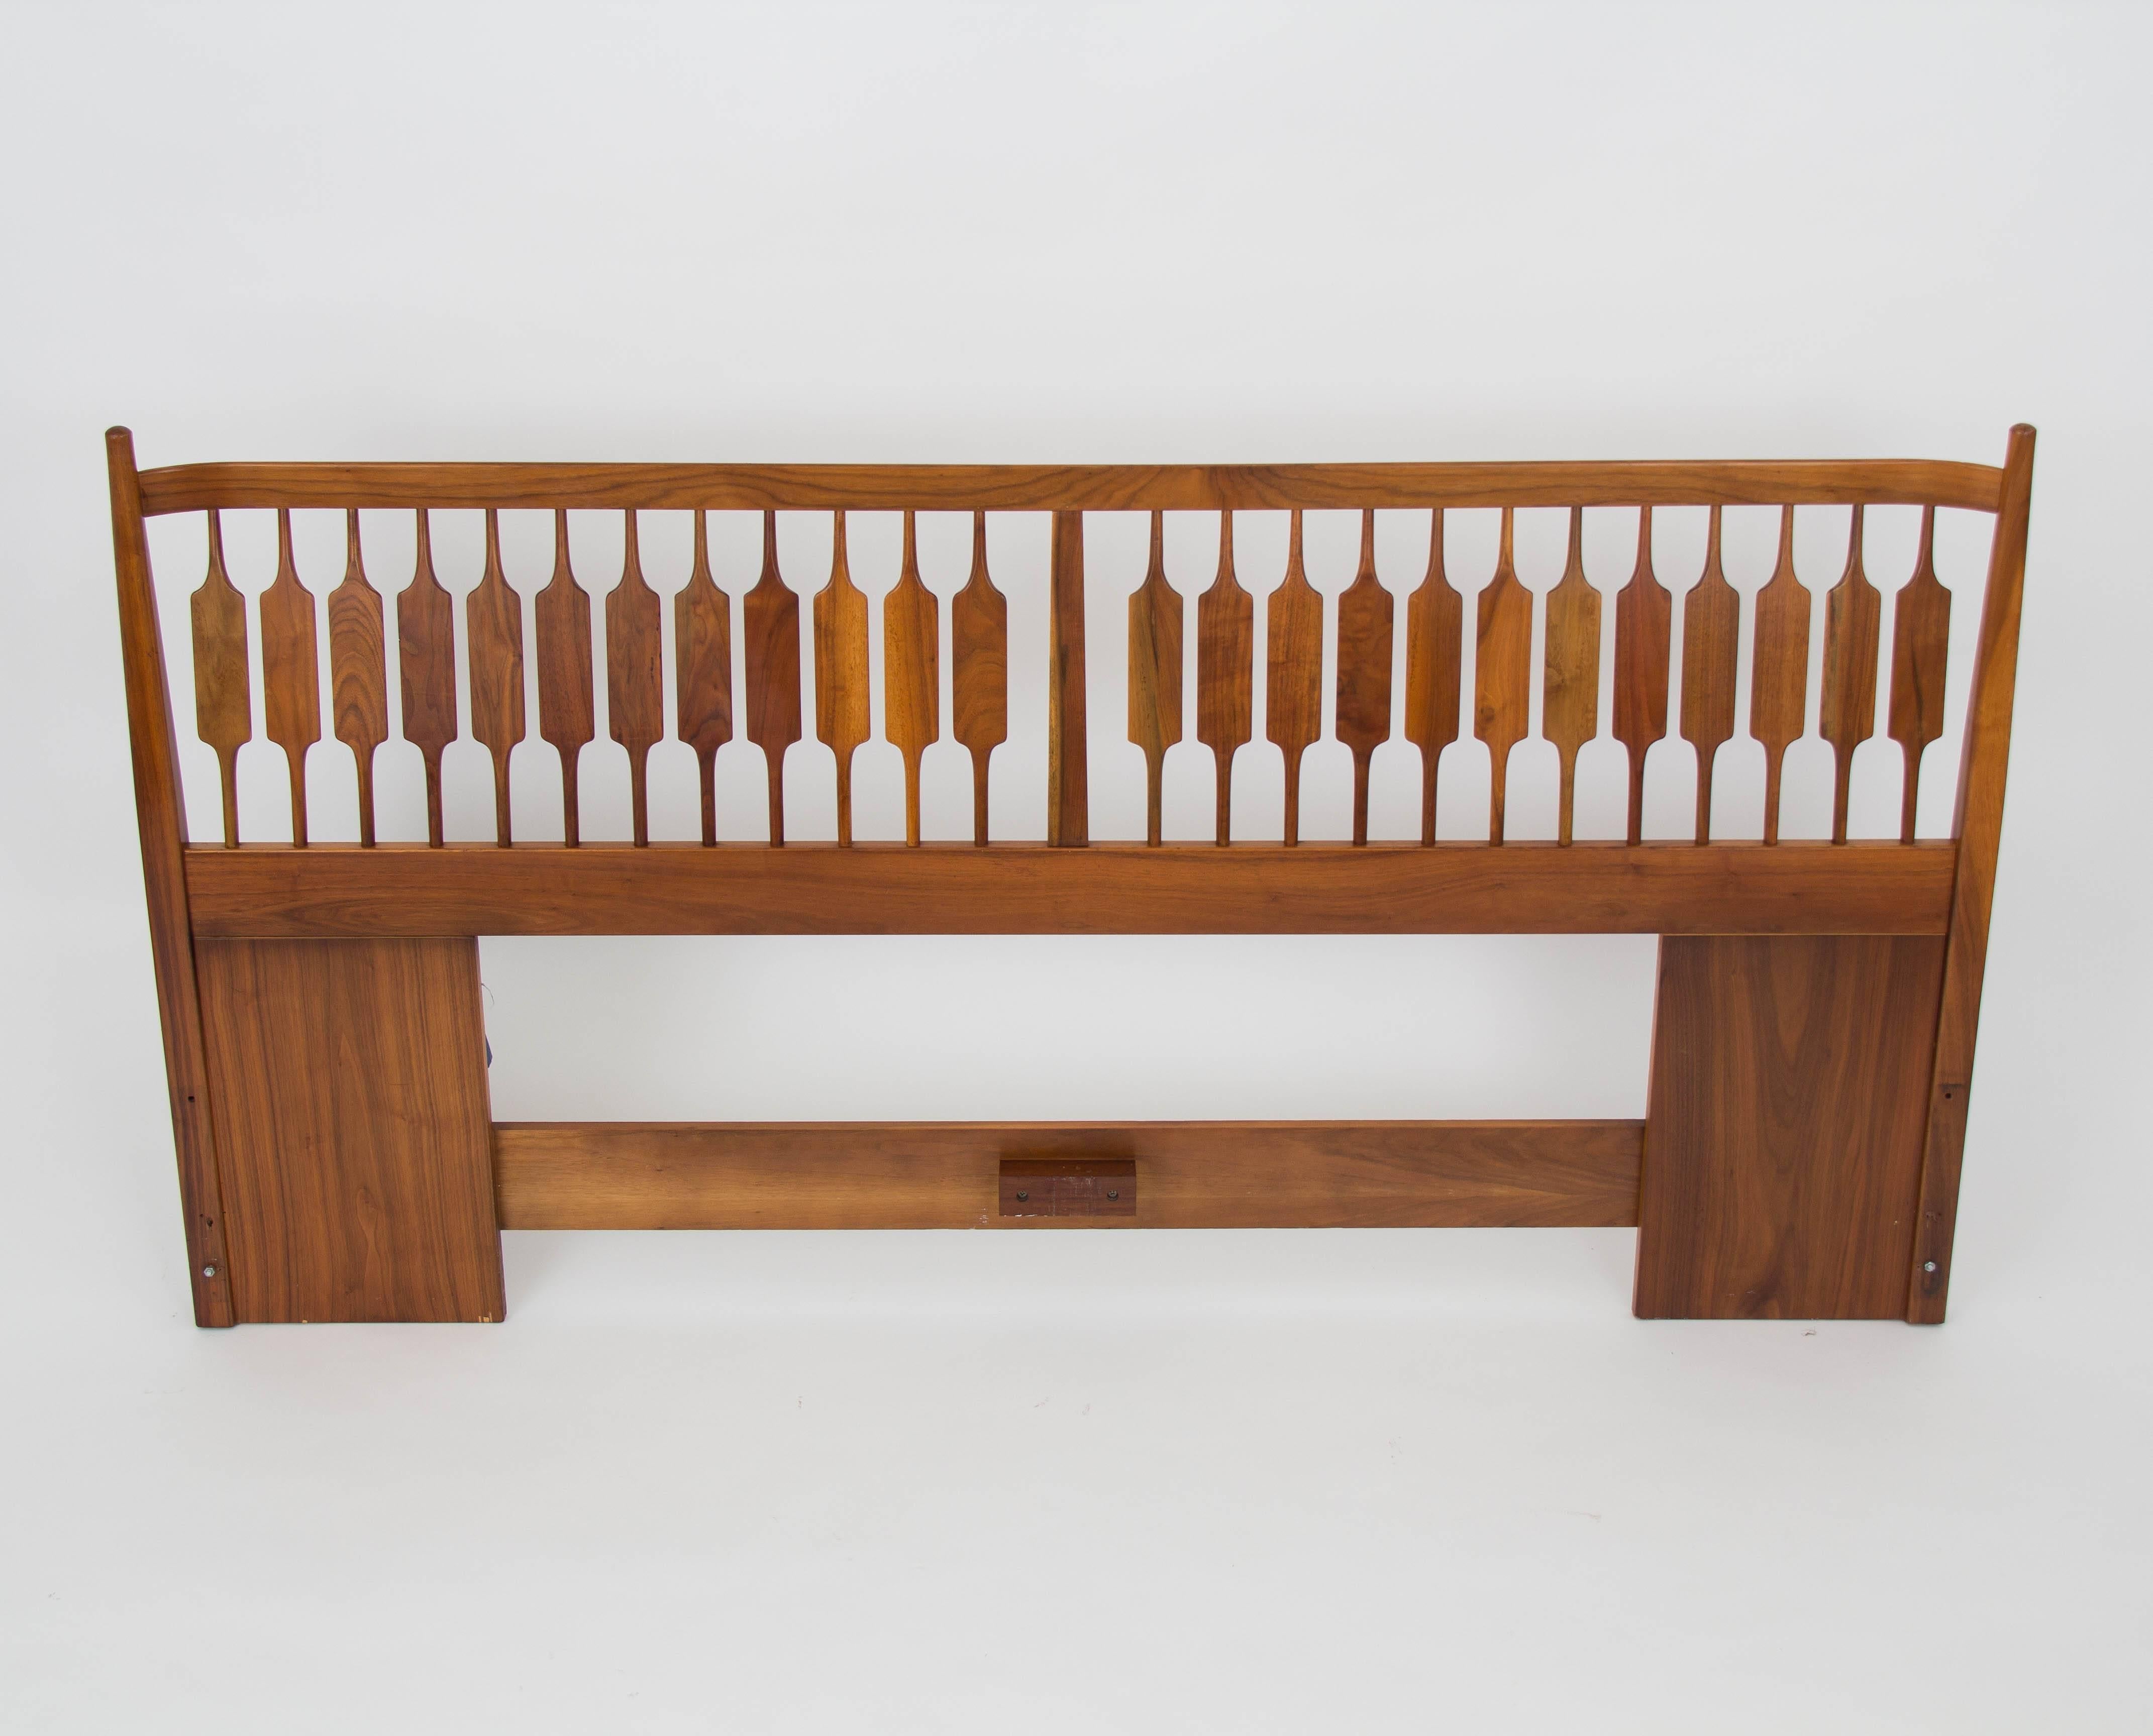 A king-sized headboard from Drexel’s popular Declaration collection designed by Kipp Stewart and Stewart MacDougall. This example is the “Catkin bed,” named for the reed-inspired sculpting on the dowels. The piece, made of walnut, has a tapered post